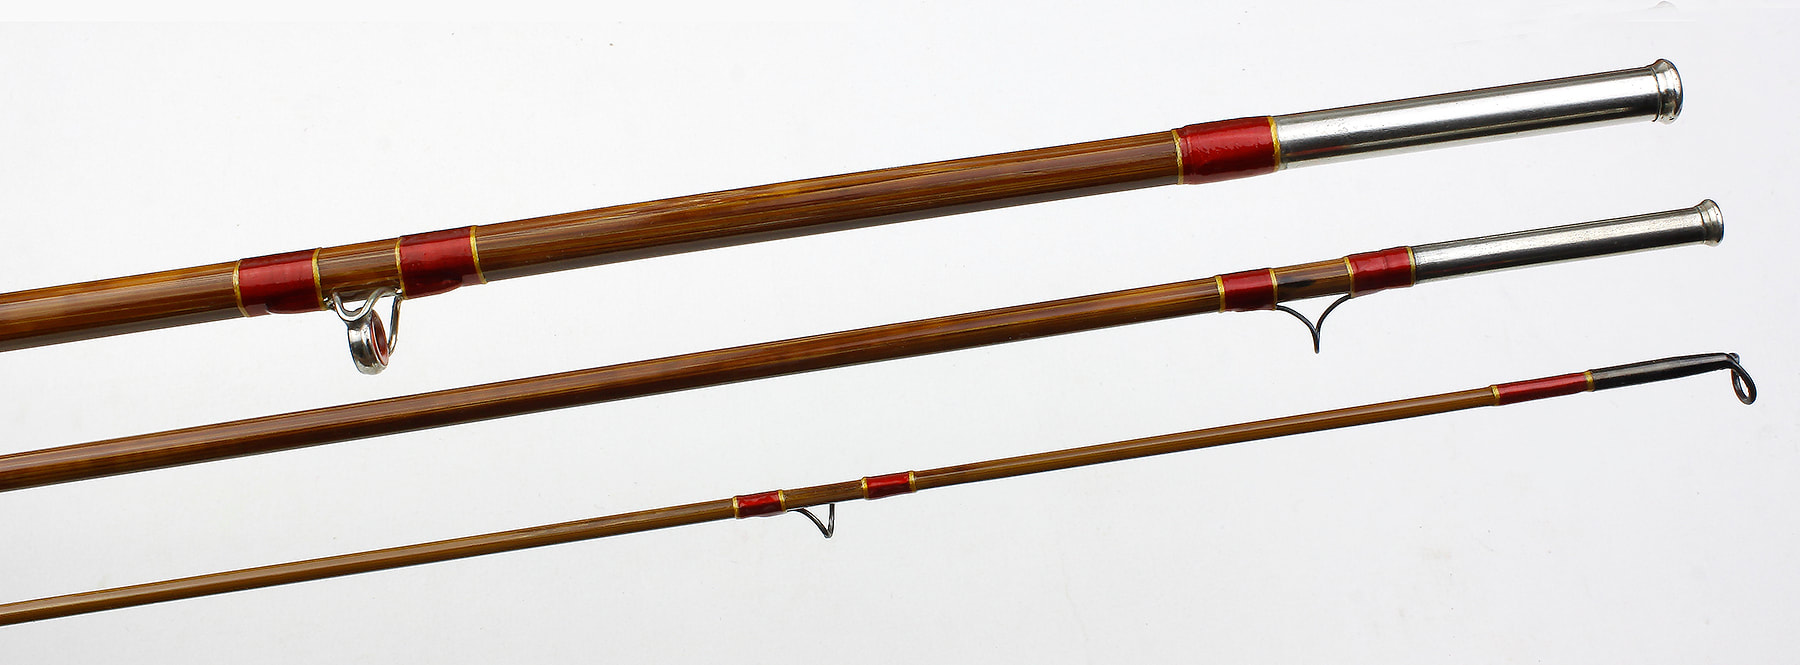 Chubb/Montague  Bamboo fly rod, Fly rods, Rods